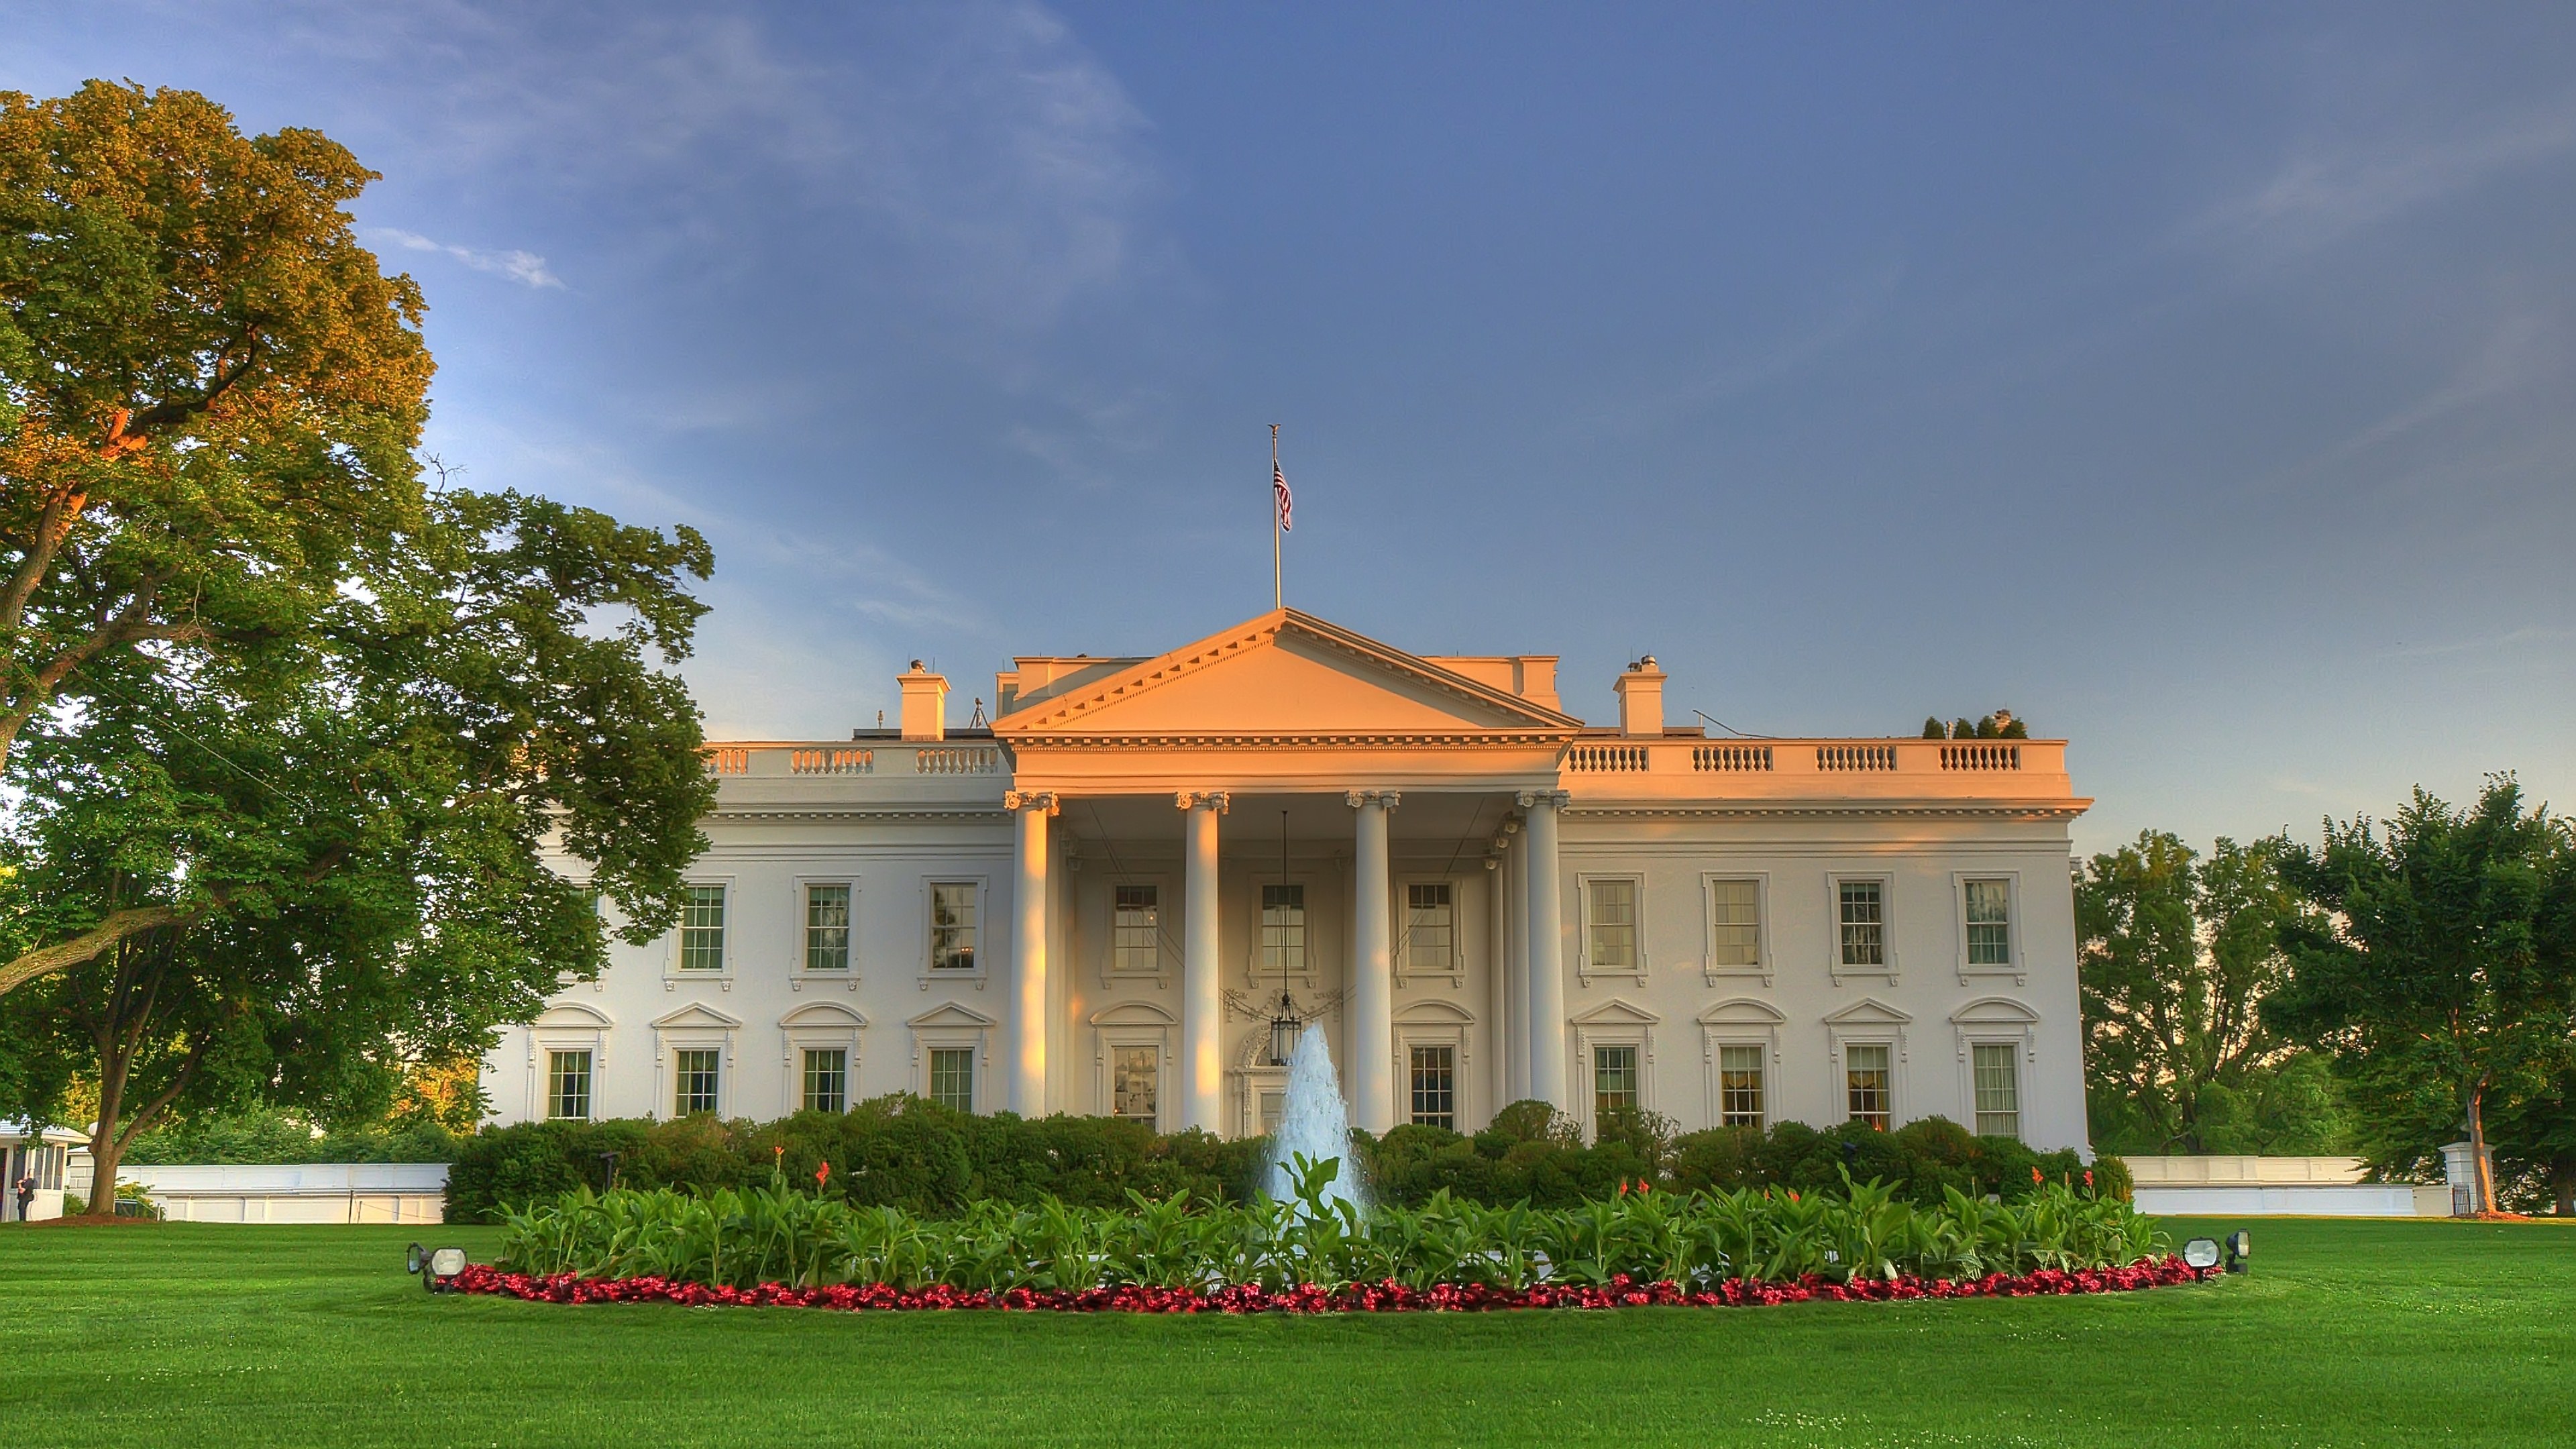 7 White House HD Wallpapers Backgrounds - Wallpaper Abyss